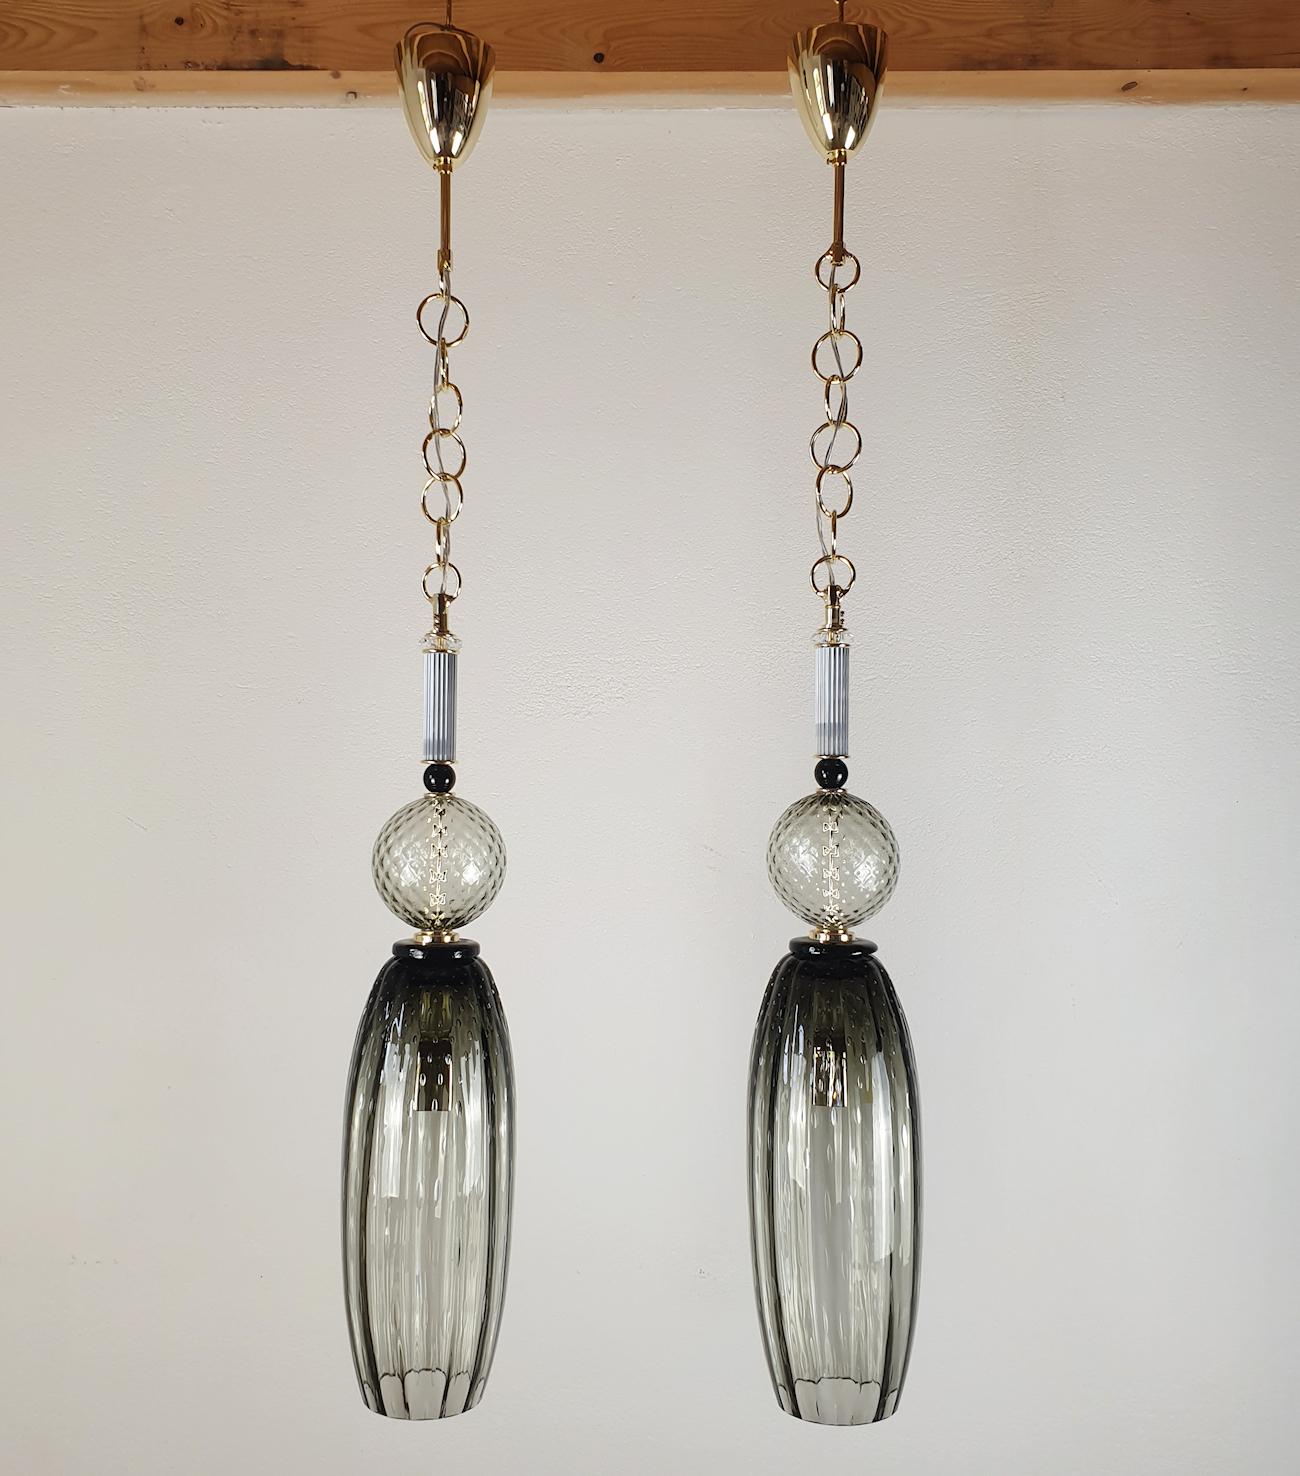 Very tall pair of Mid-Century Modern pendant lights, in a beautiful quality and handmade Murano glass. Italy 1990s.
The pair of pendants are made of several parts in Murano glass, in different shapes and colors: clear, gray, silver.
The last